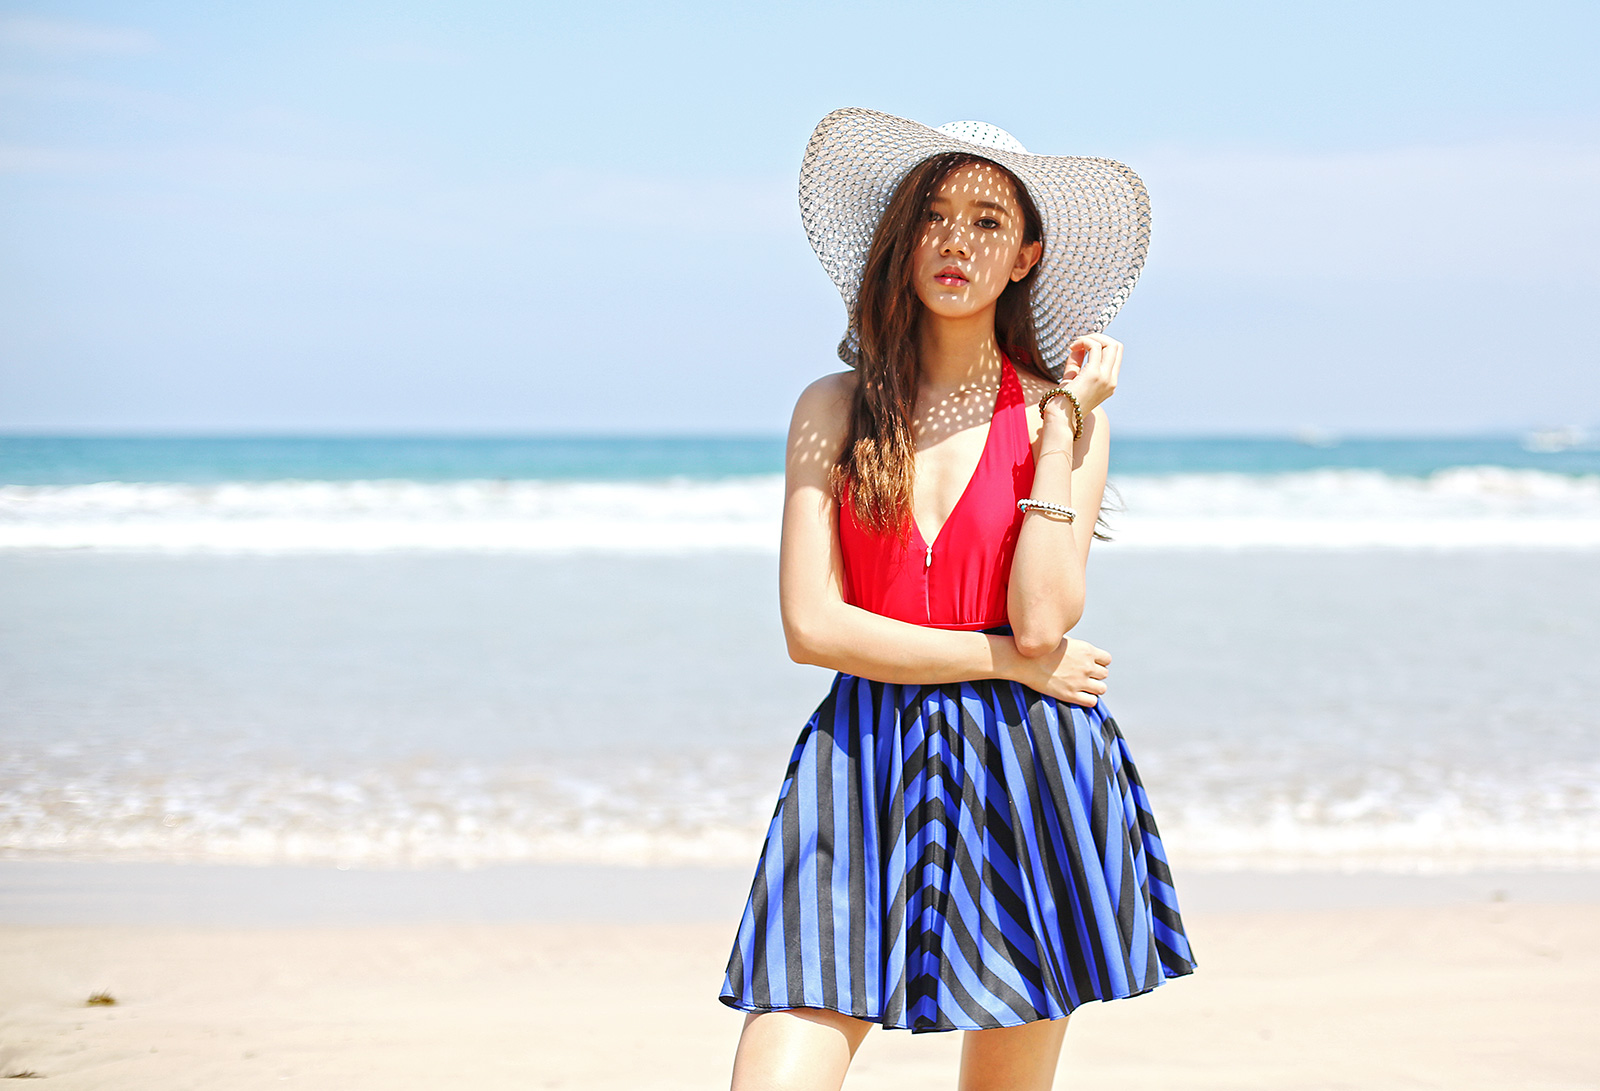 Soak Swimwear swimsuit, CPS skirt, Vince Camuto sandals, SM Accessories floppy hat | www.itscamilleco.com